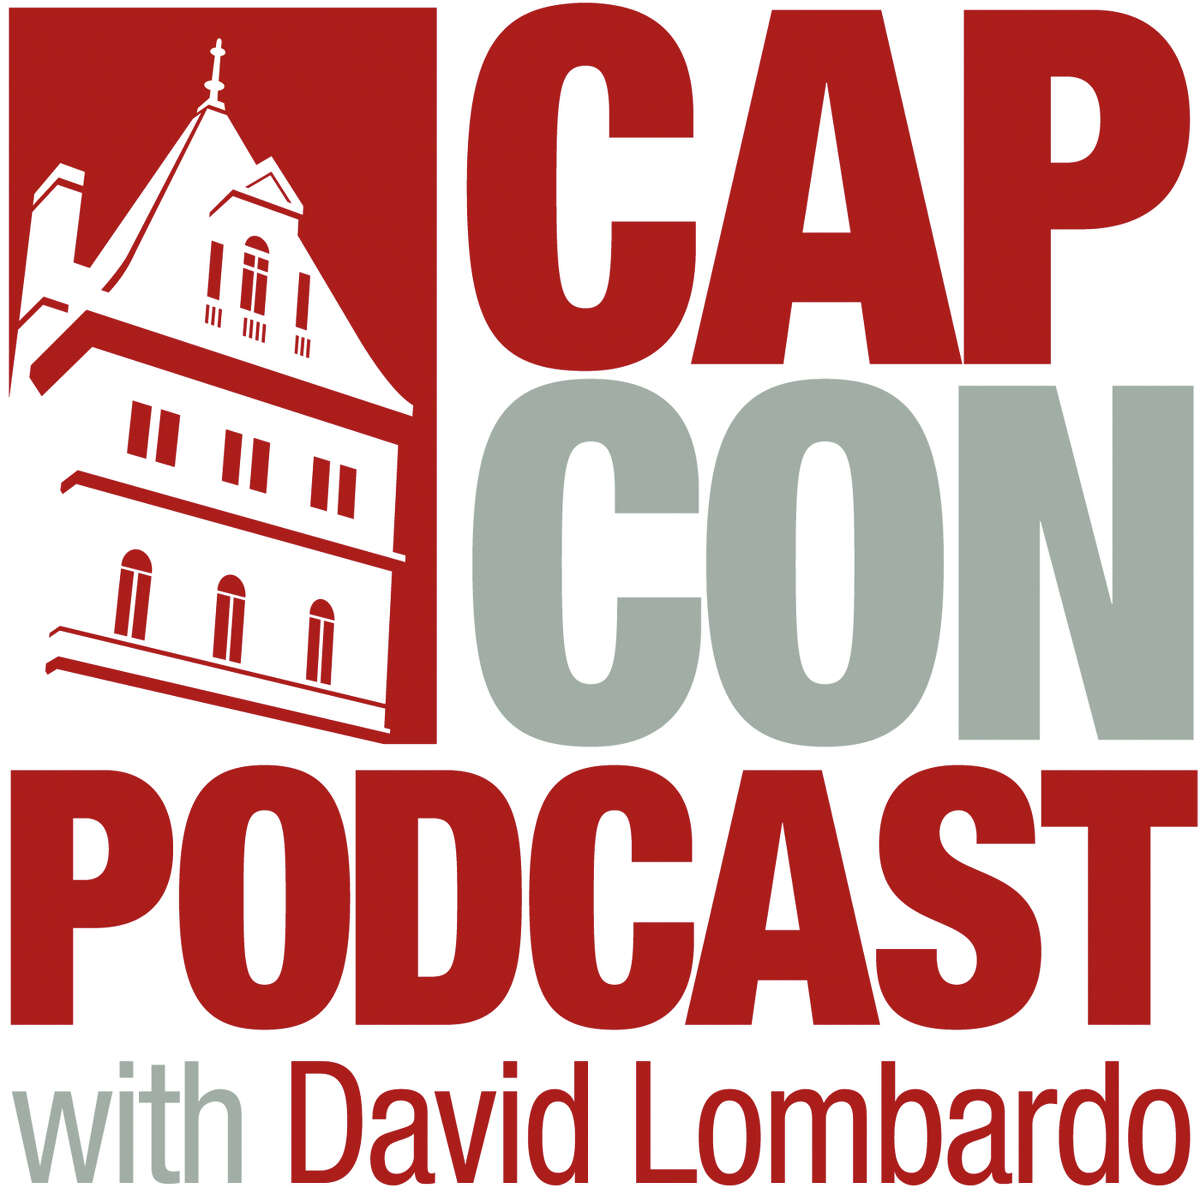 The Times Union's Capitol Confidential podcast produces new weekly episodes every Friday.